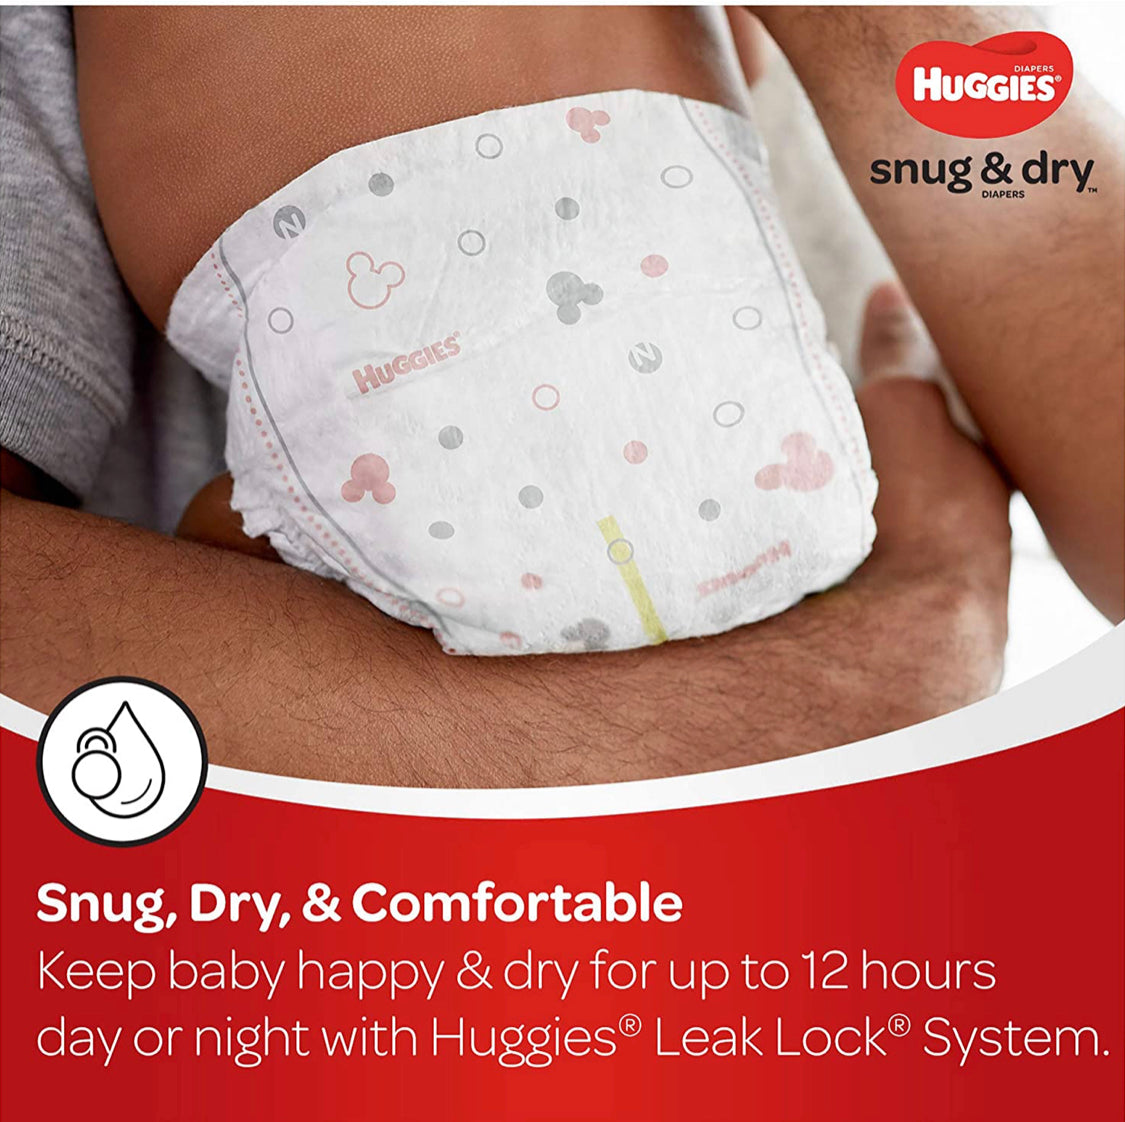 Huggies Snug & Dry Baby Diapers, Size 1, 200 Count